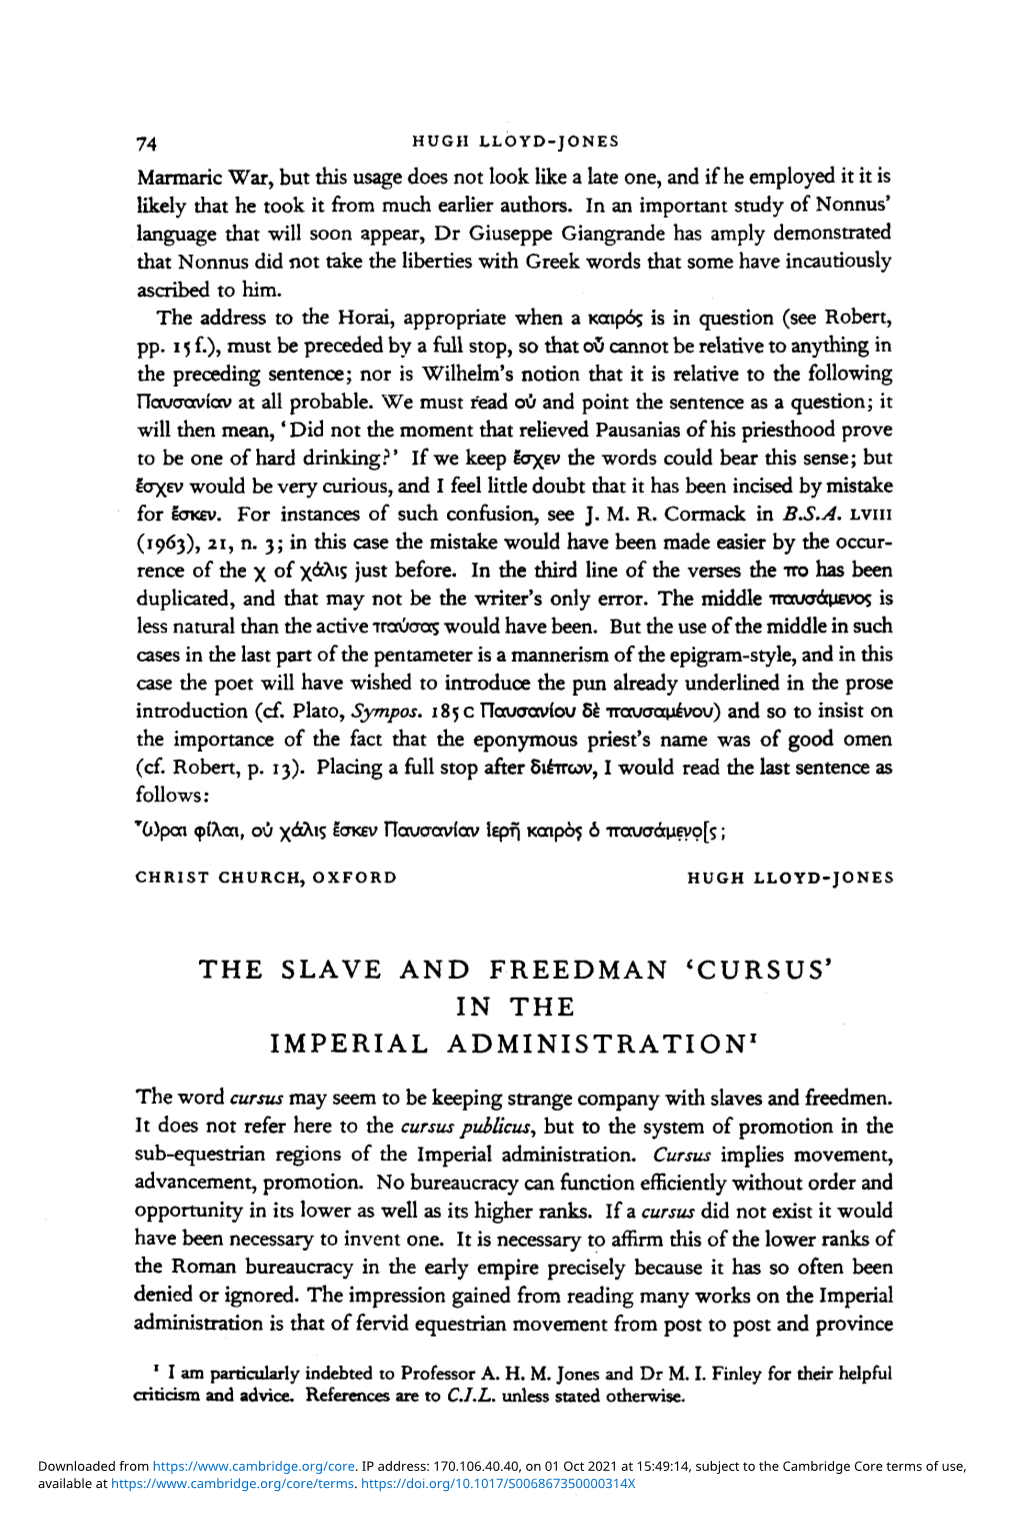 The Slave and Freedman 'Cursus' in the Imperial Administration1